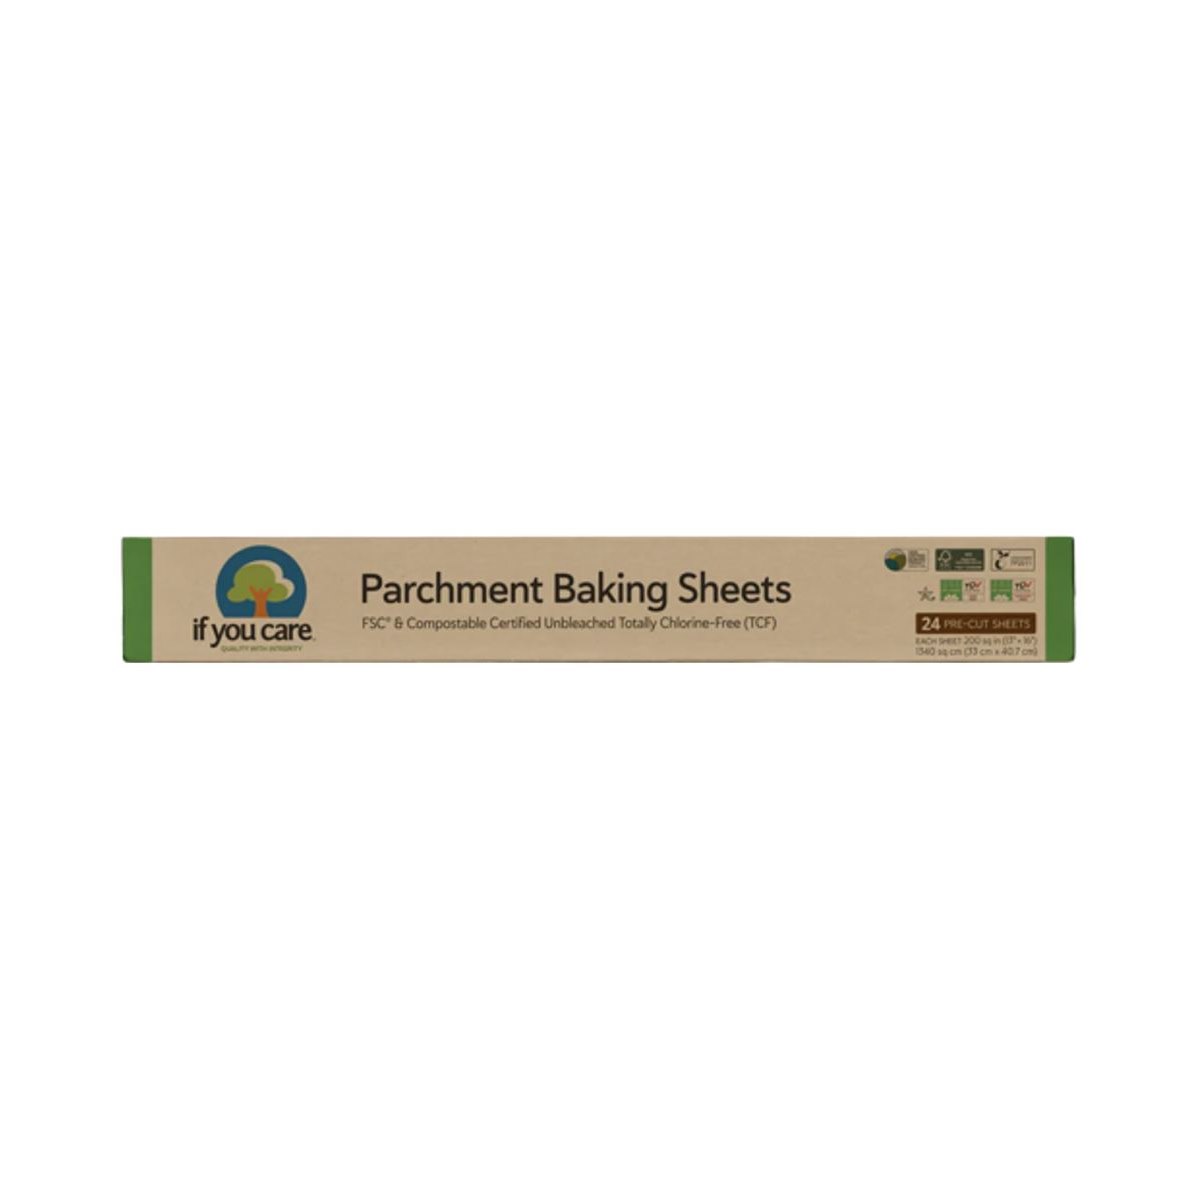 If You Care Parchment Baking Sheets Pack of 24